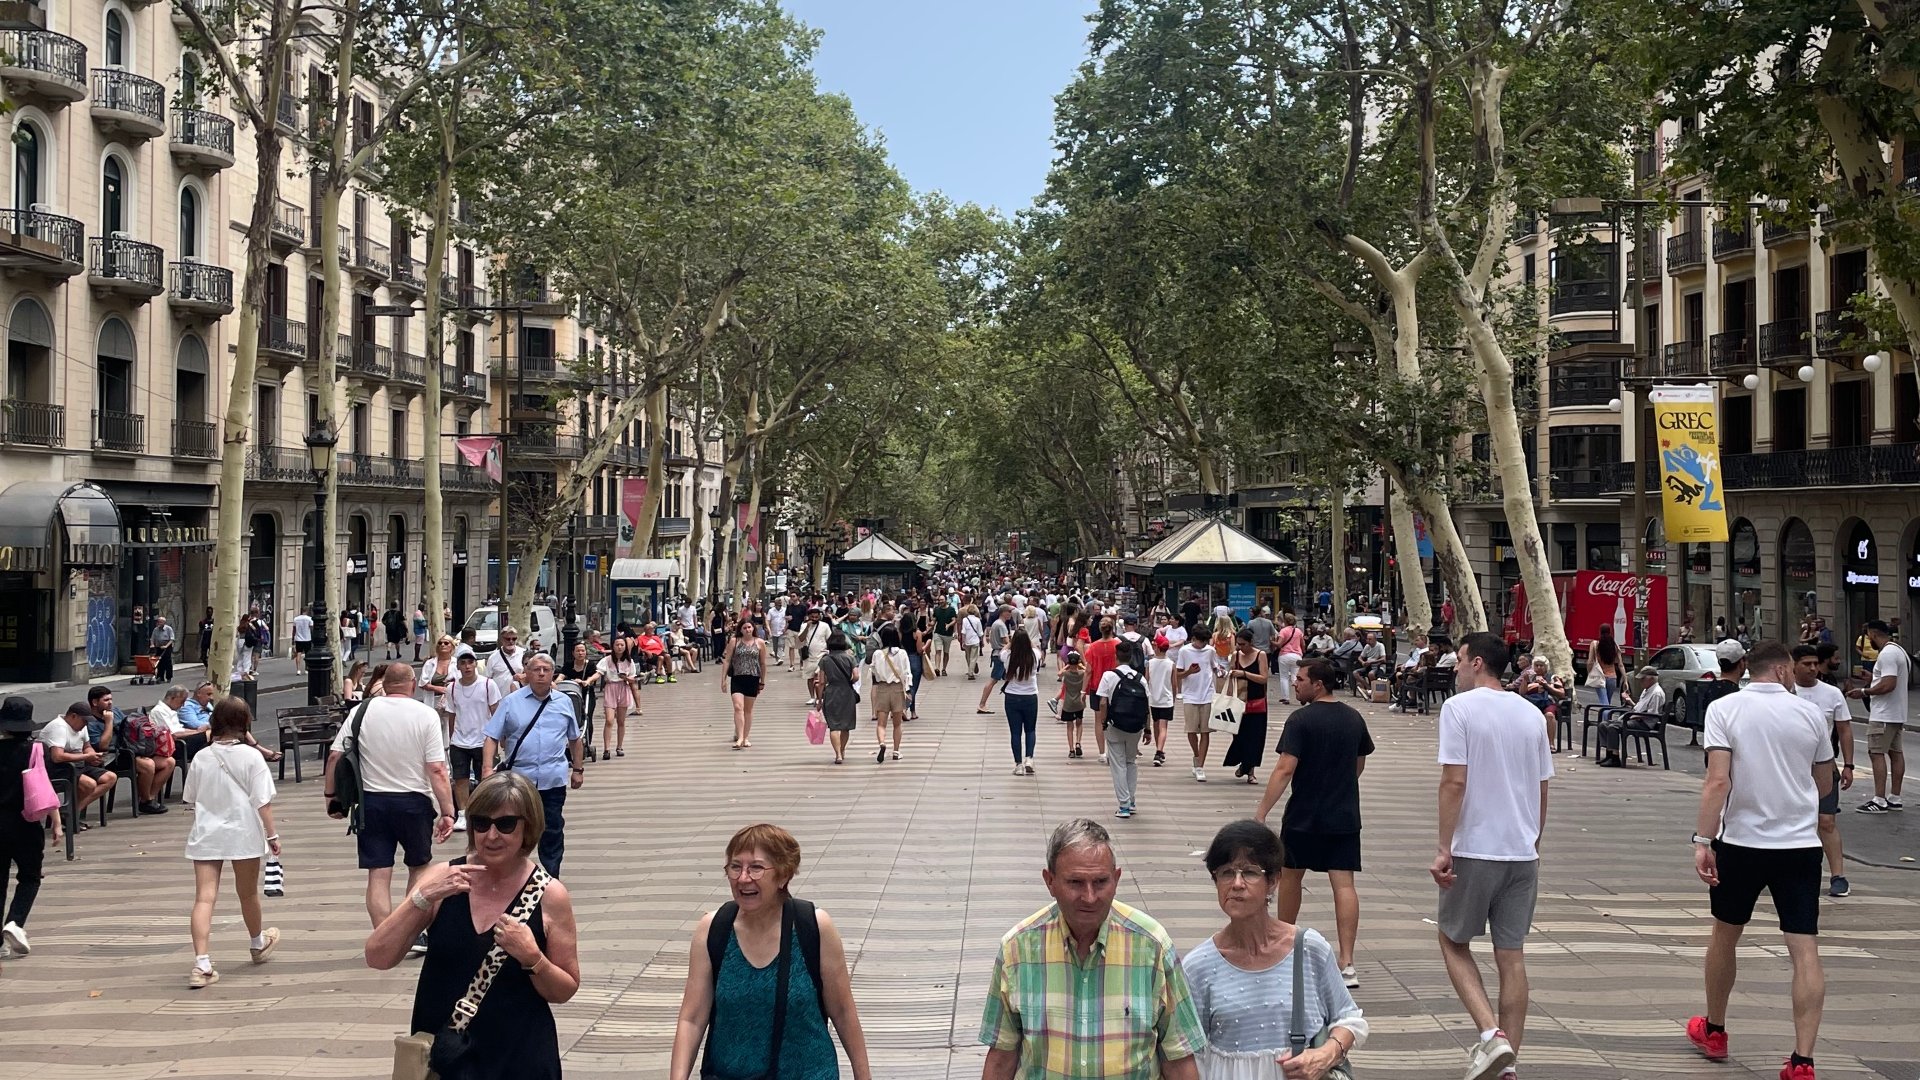 La Rambla: a guide to one of Barcelona’s most famous streets